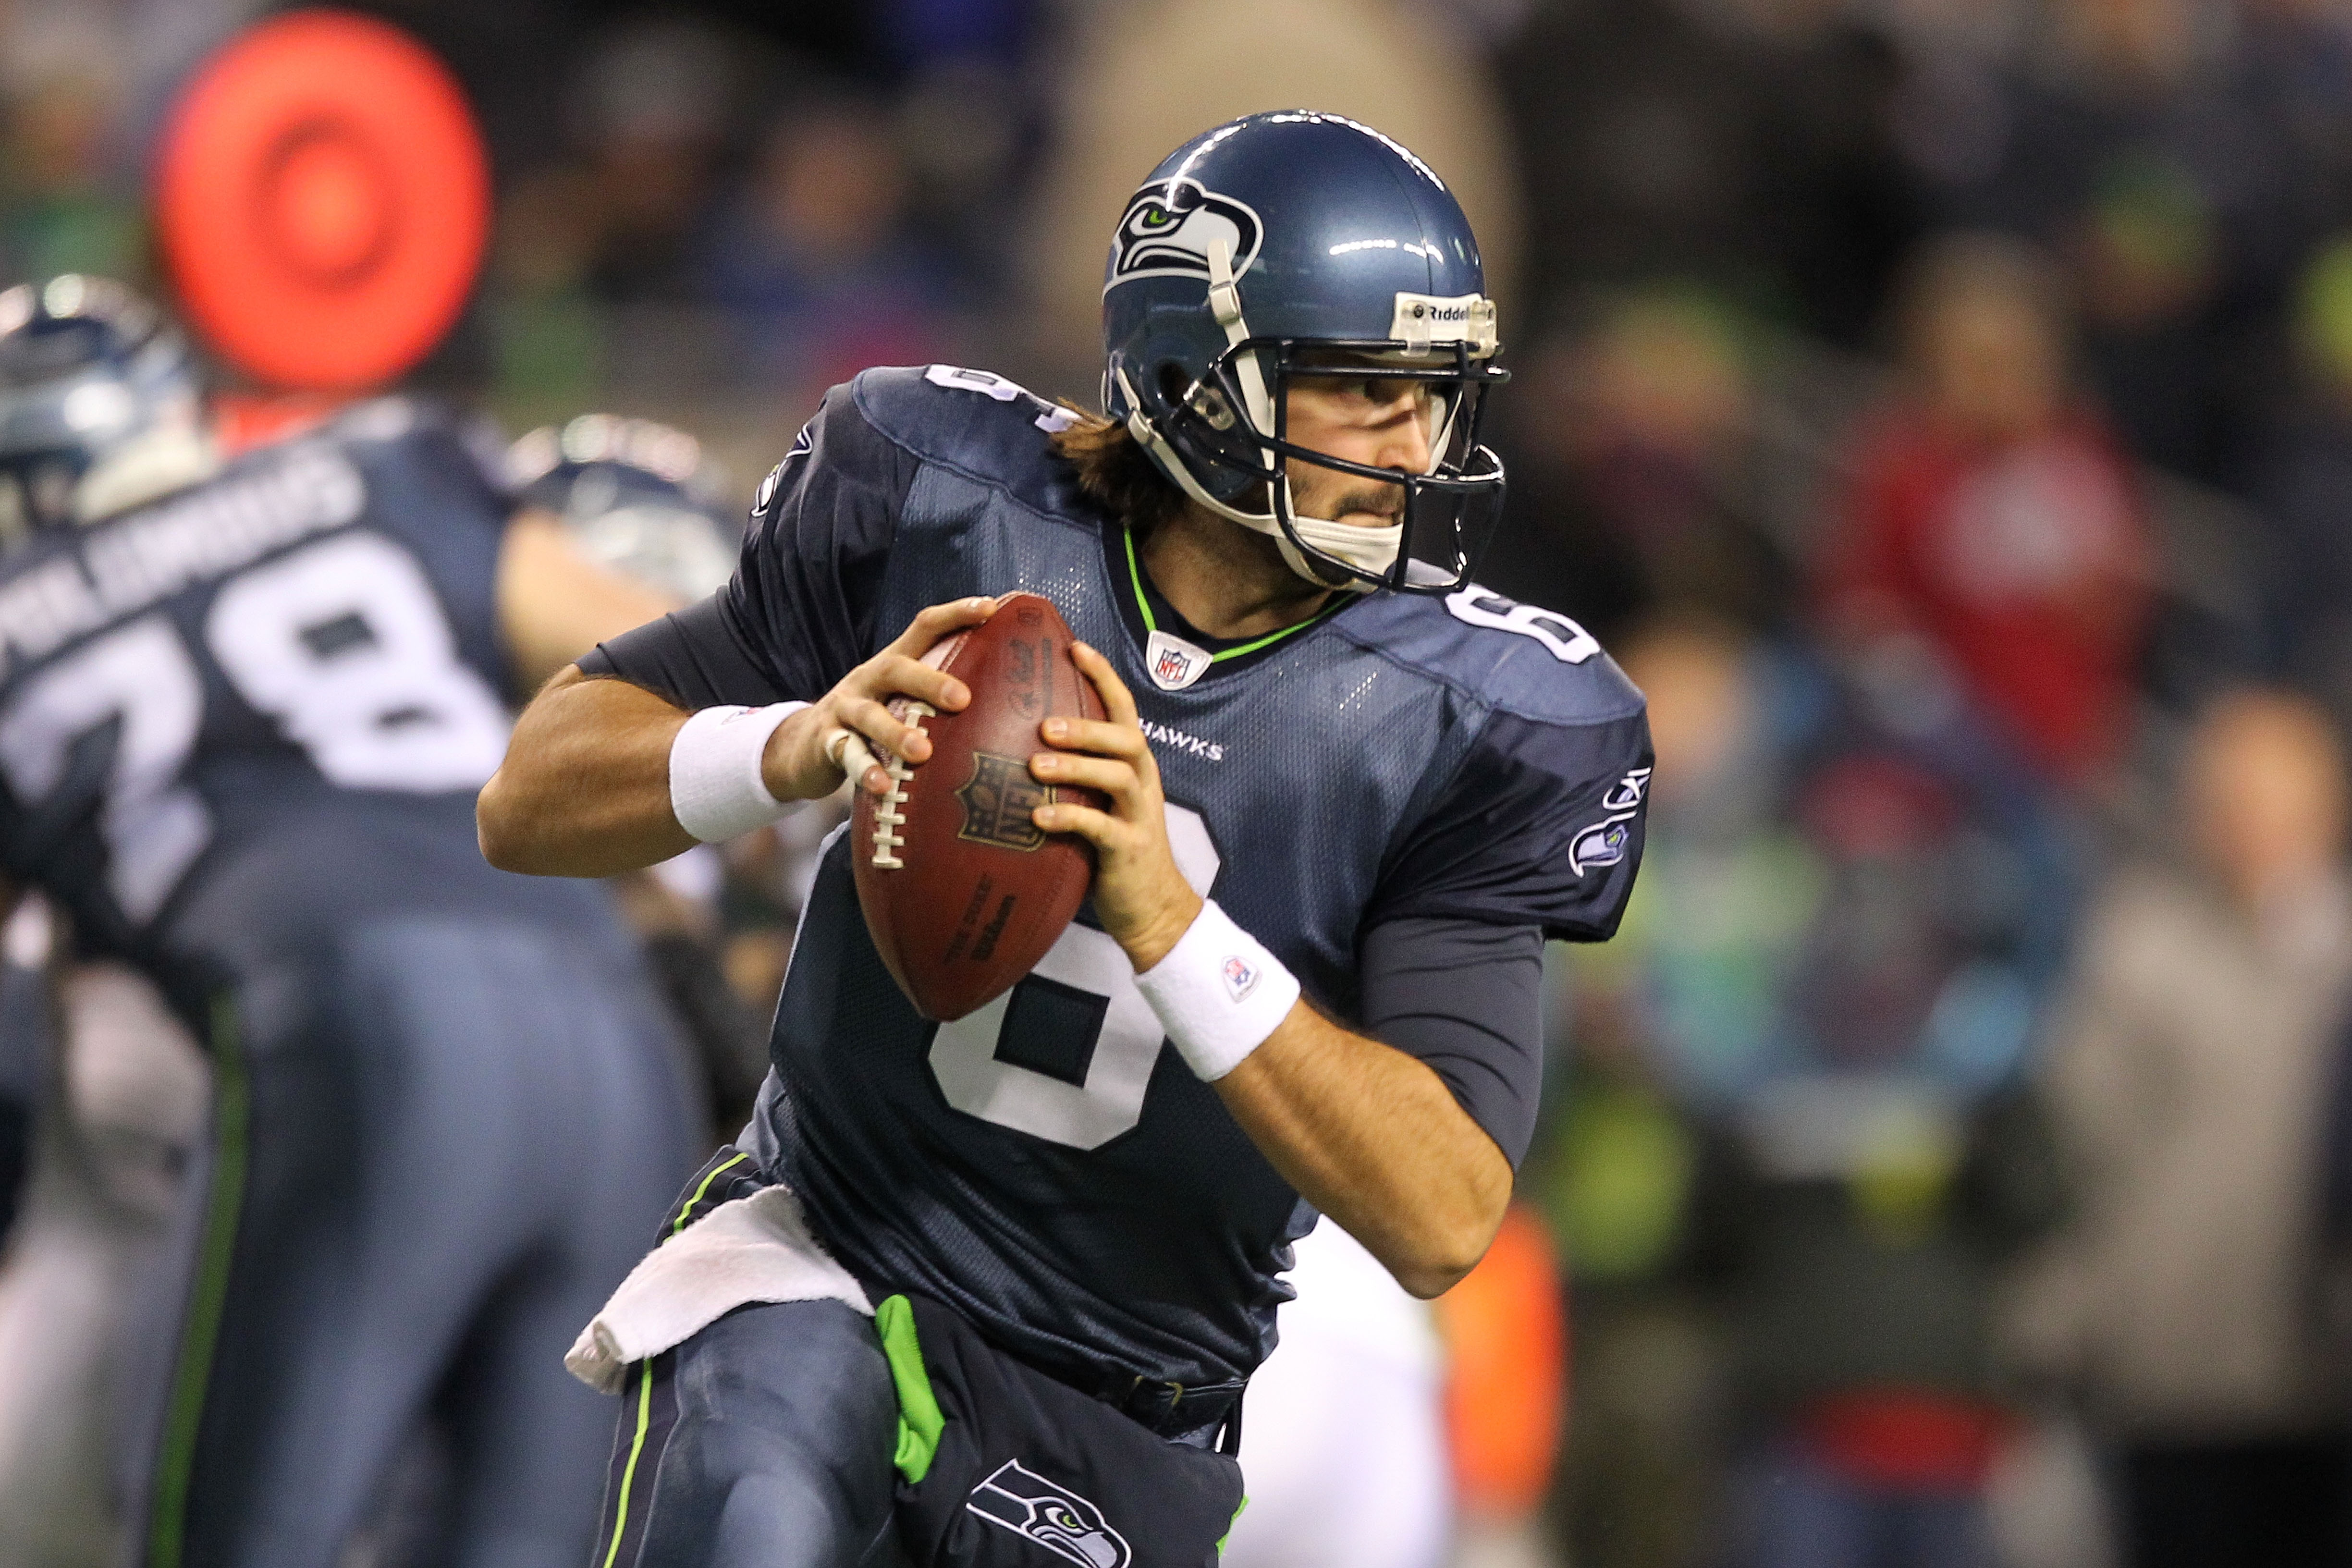 SEATTLE, WA - JANUARY 02:  Quarterback Charlie Whitehurst #6 of the Seattle Seahawks looks to pass during their game against the St. Louis Rams at Qwest Field on January 2, 2011 in Seattle, Washington.  (Photo by Otto Greule Jr/Getty Images)